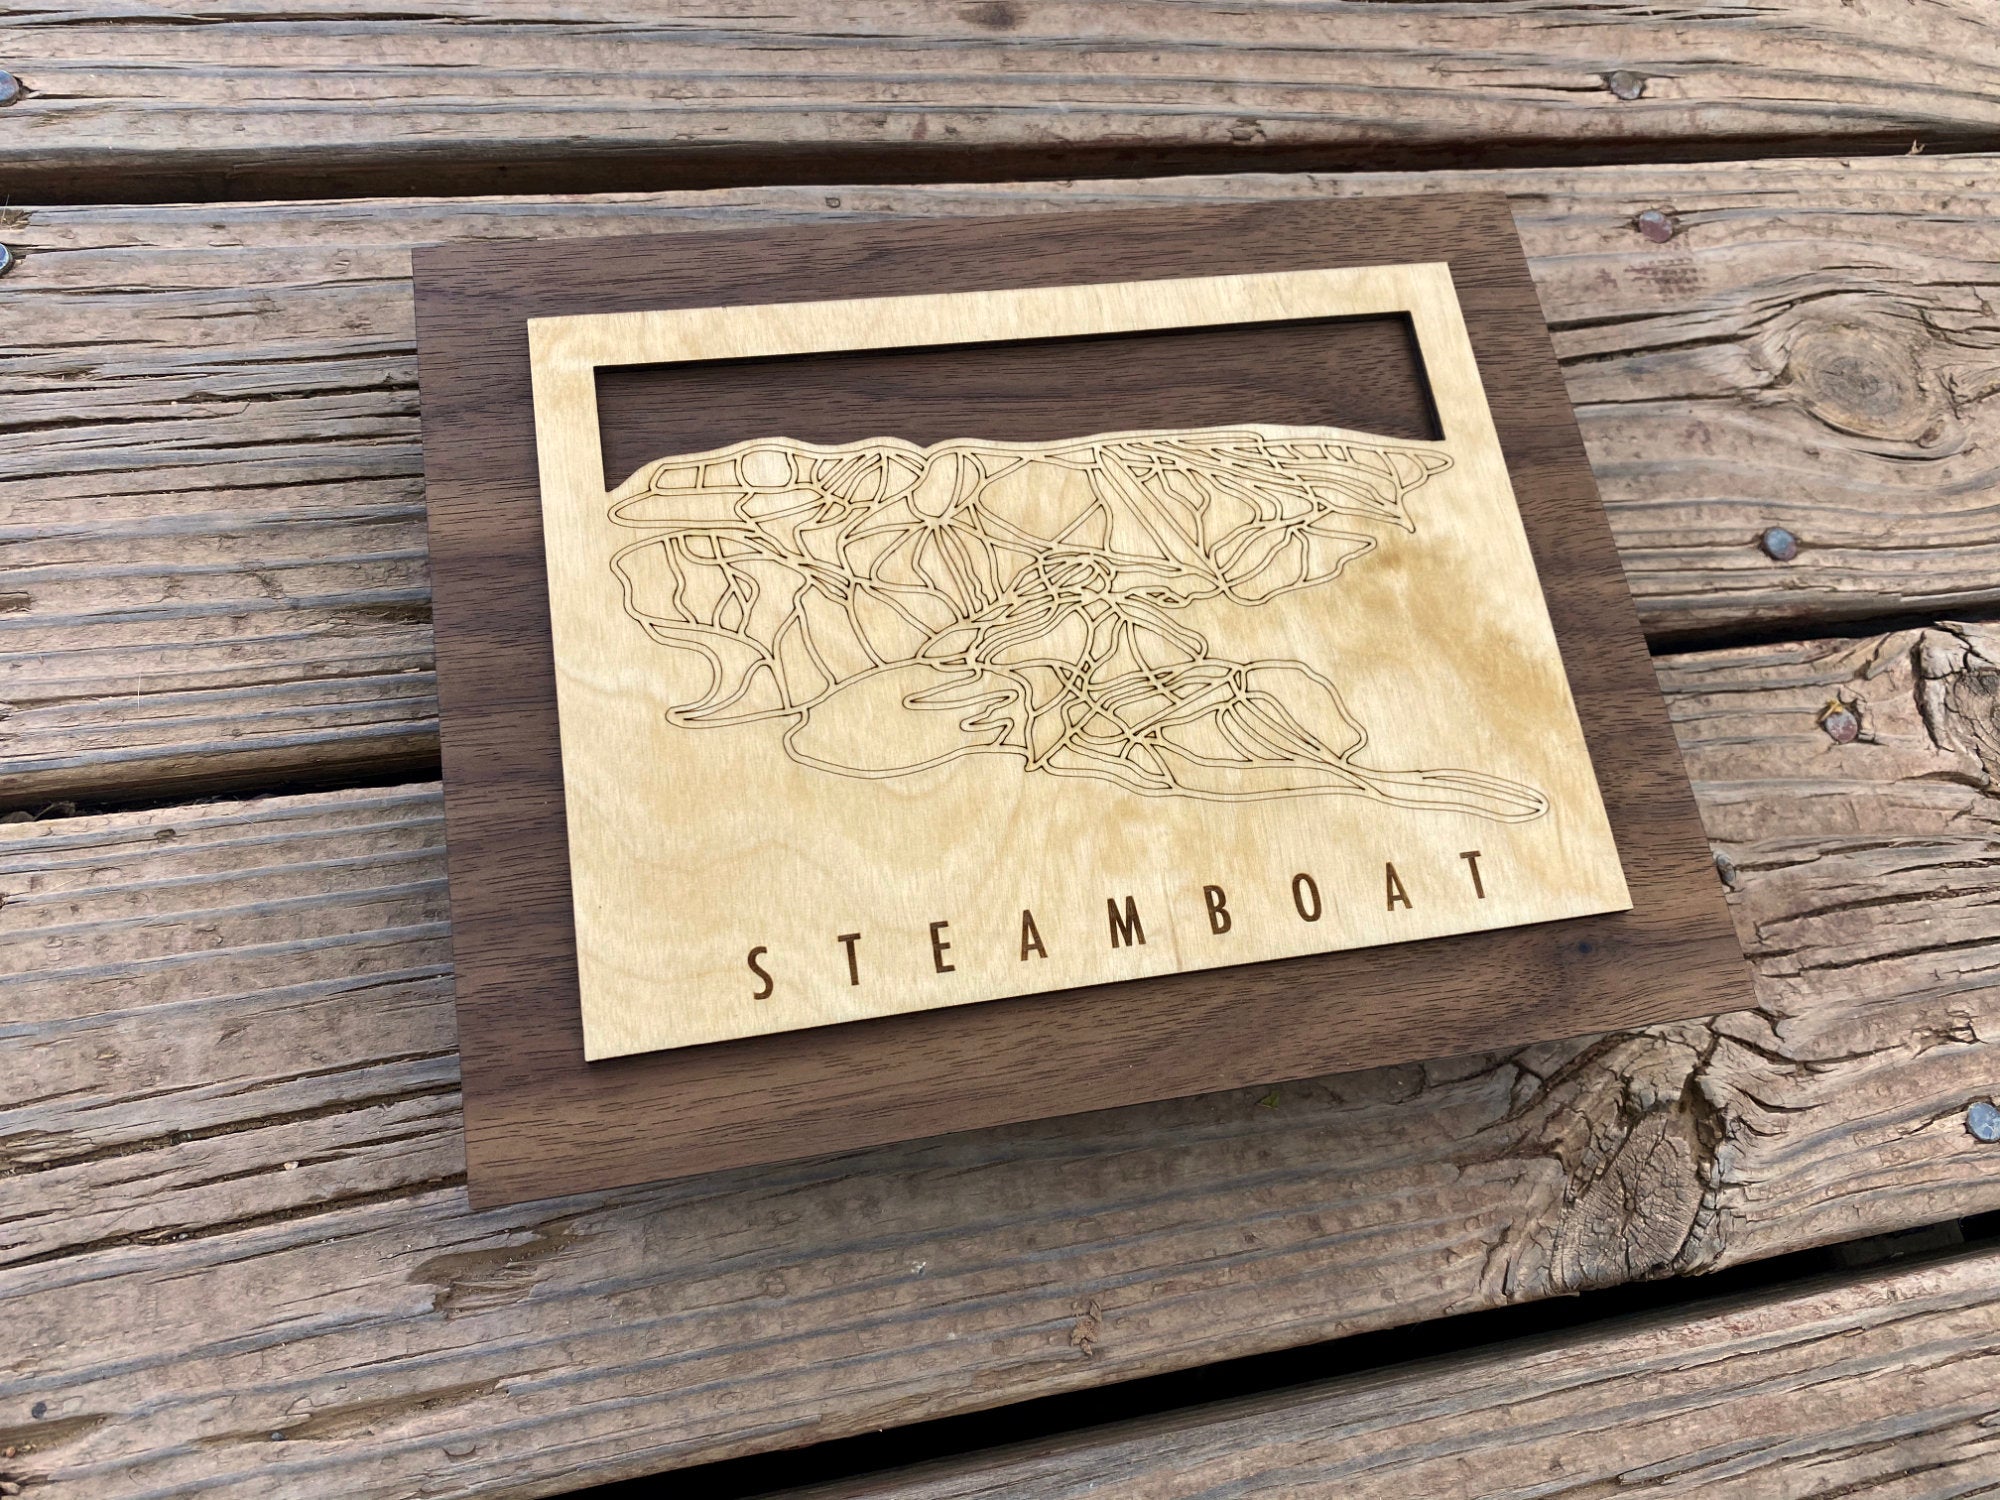 Small Steamboat Trail Map